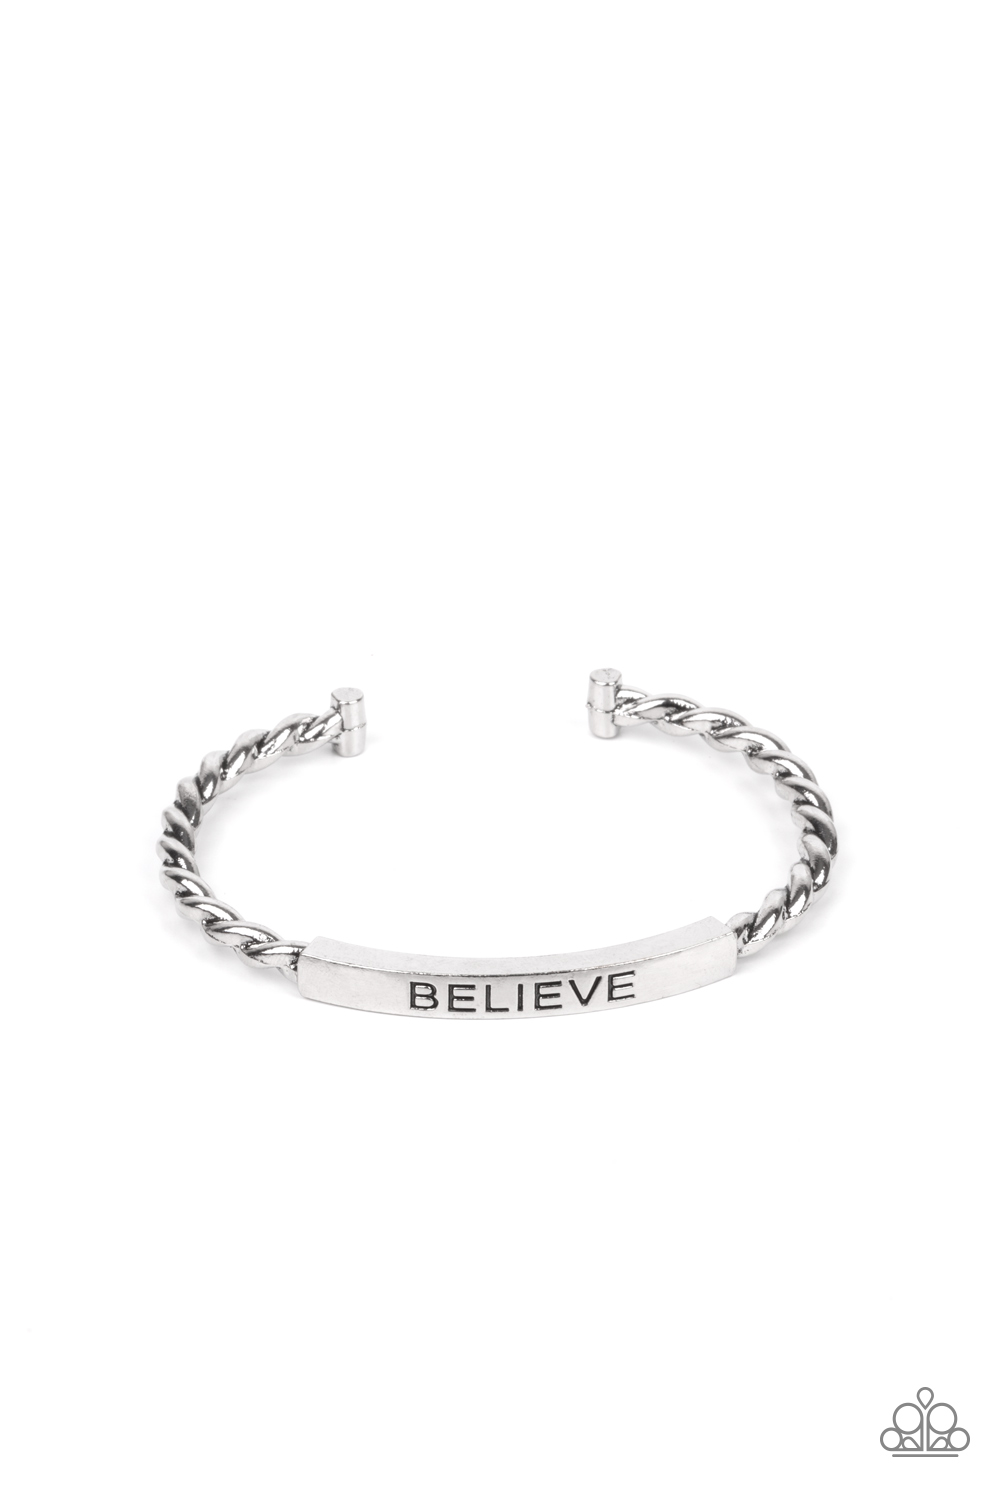 Bracelet - Keep Calm and Believe - Silver